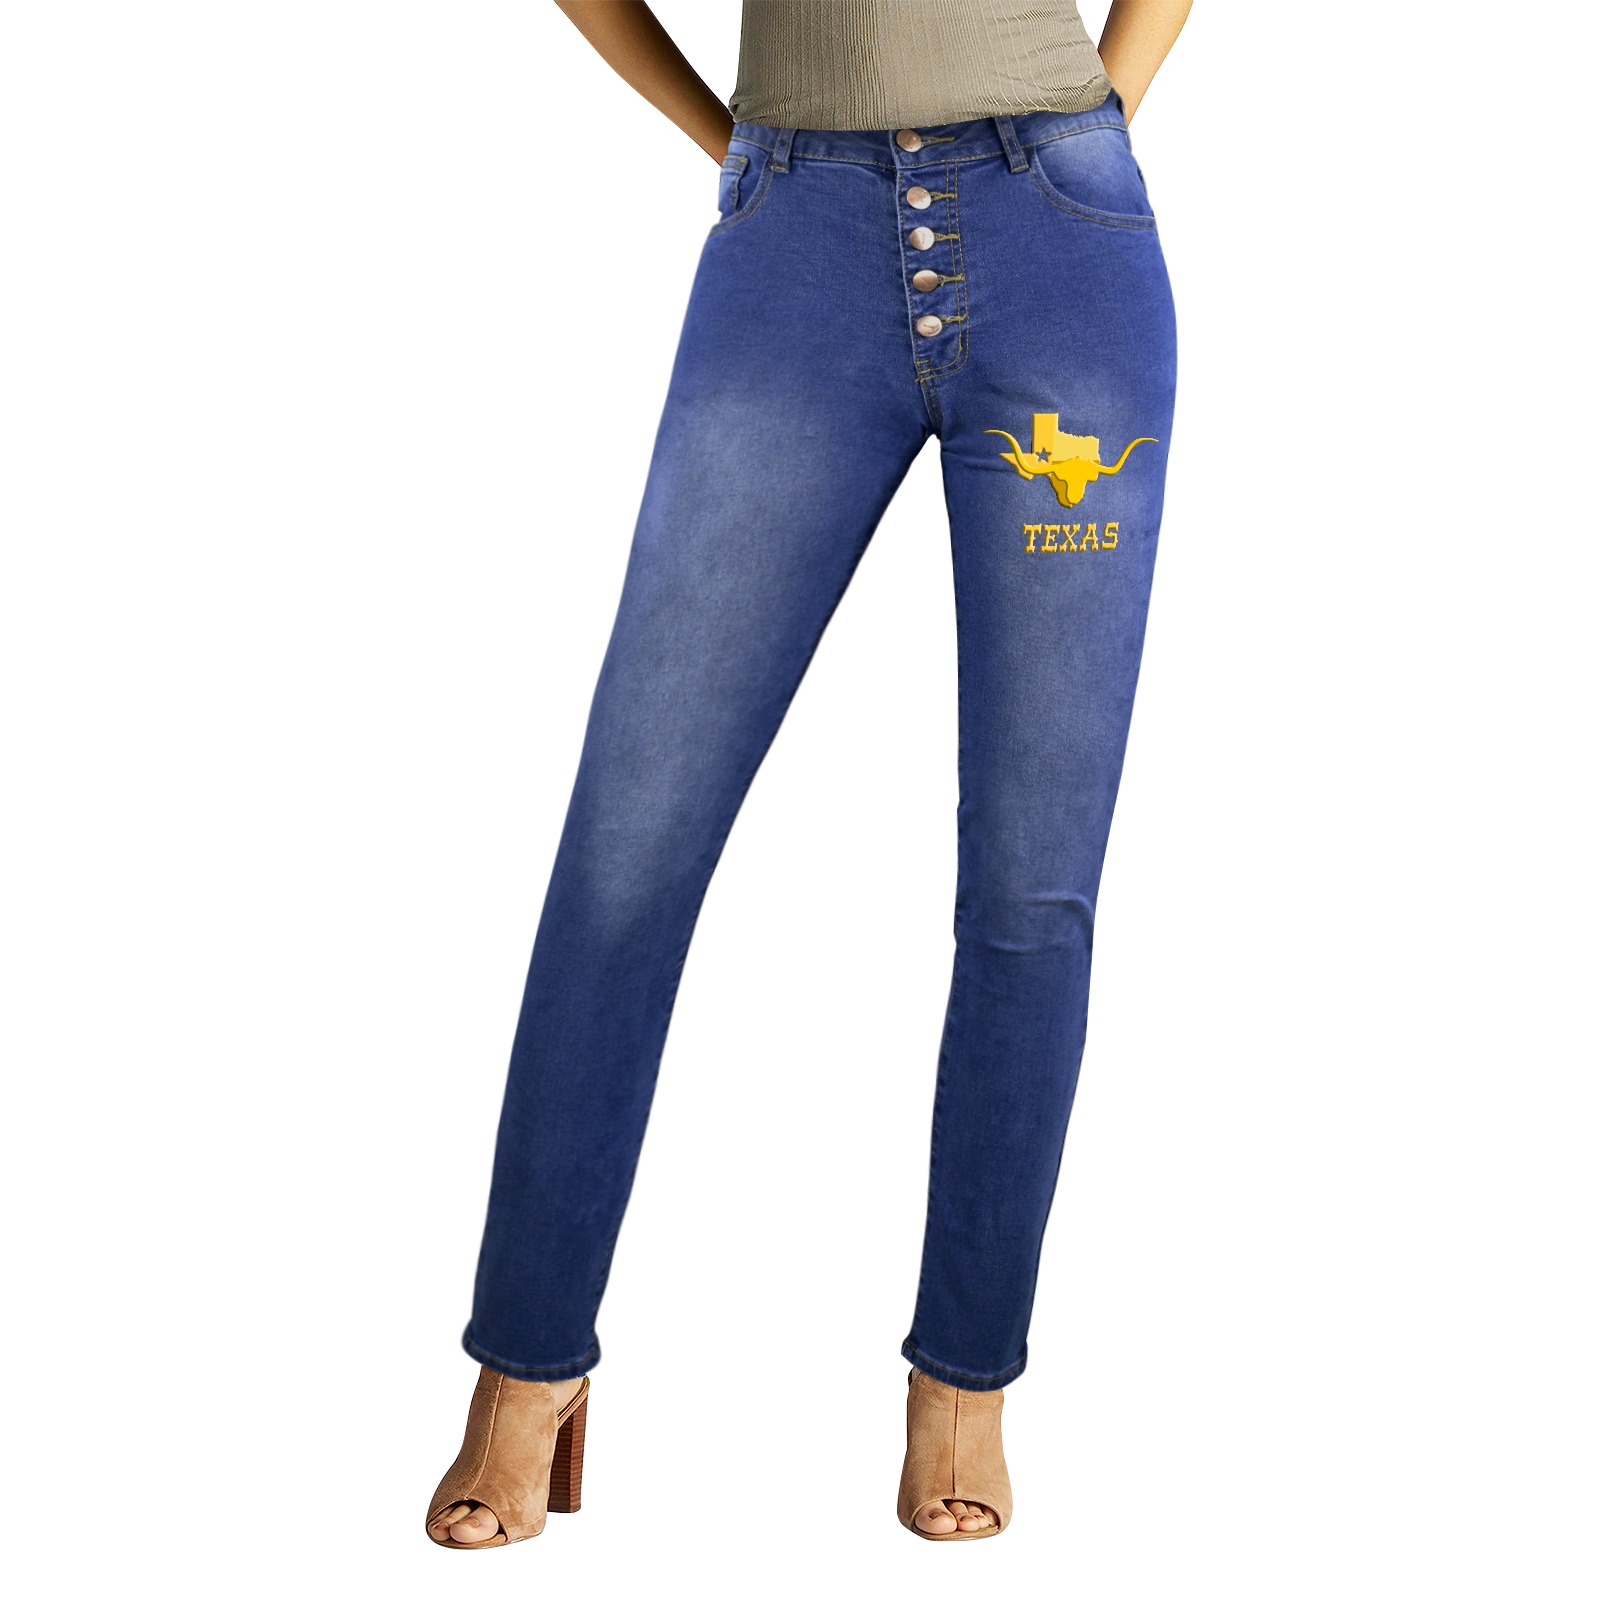 Yellow TEXAS word, map, longhorn head, art. Women's Jeans (Front&Back Printing)